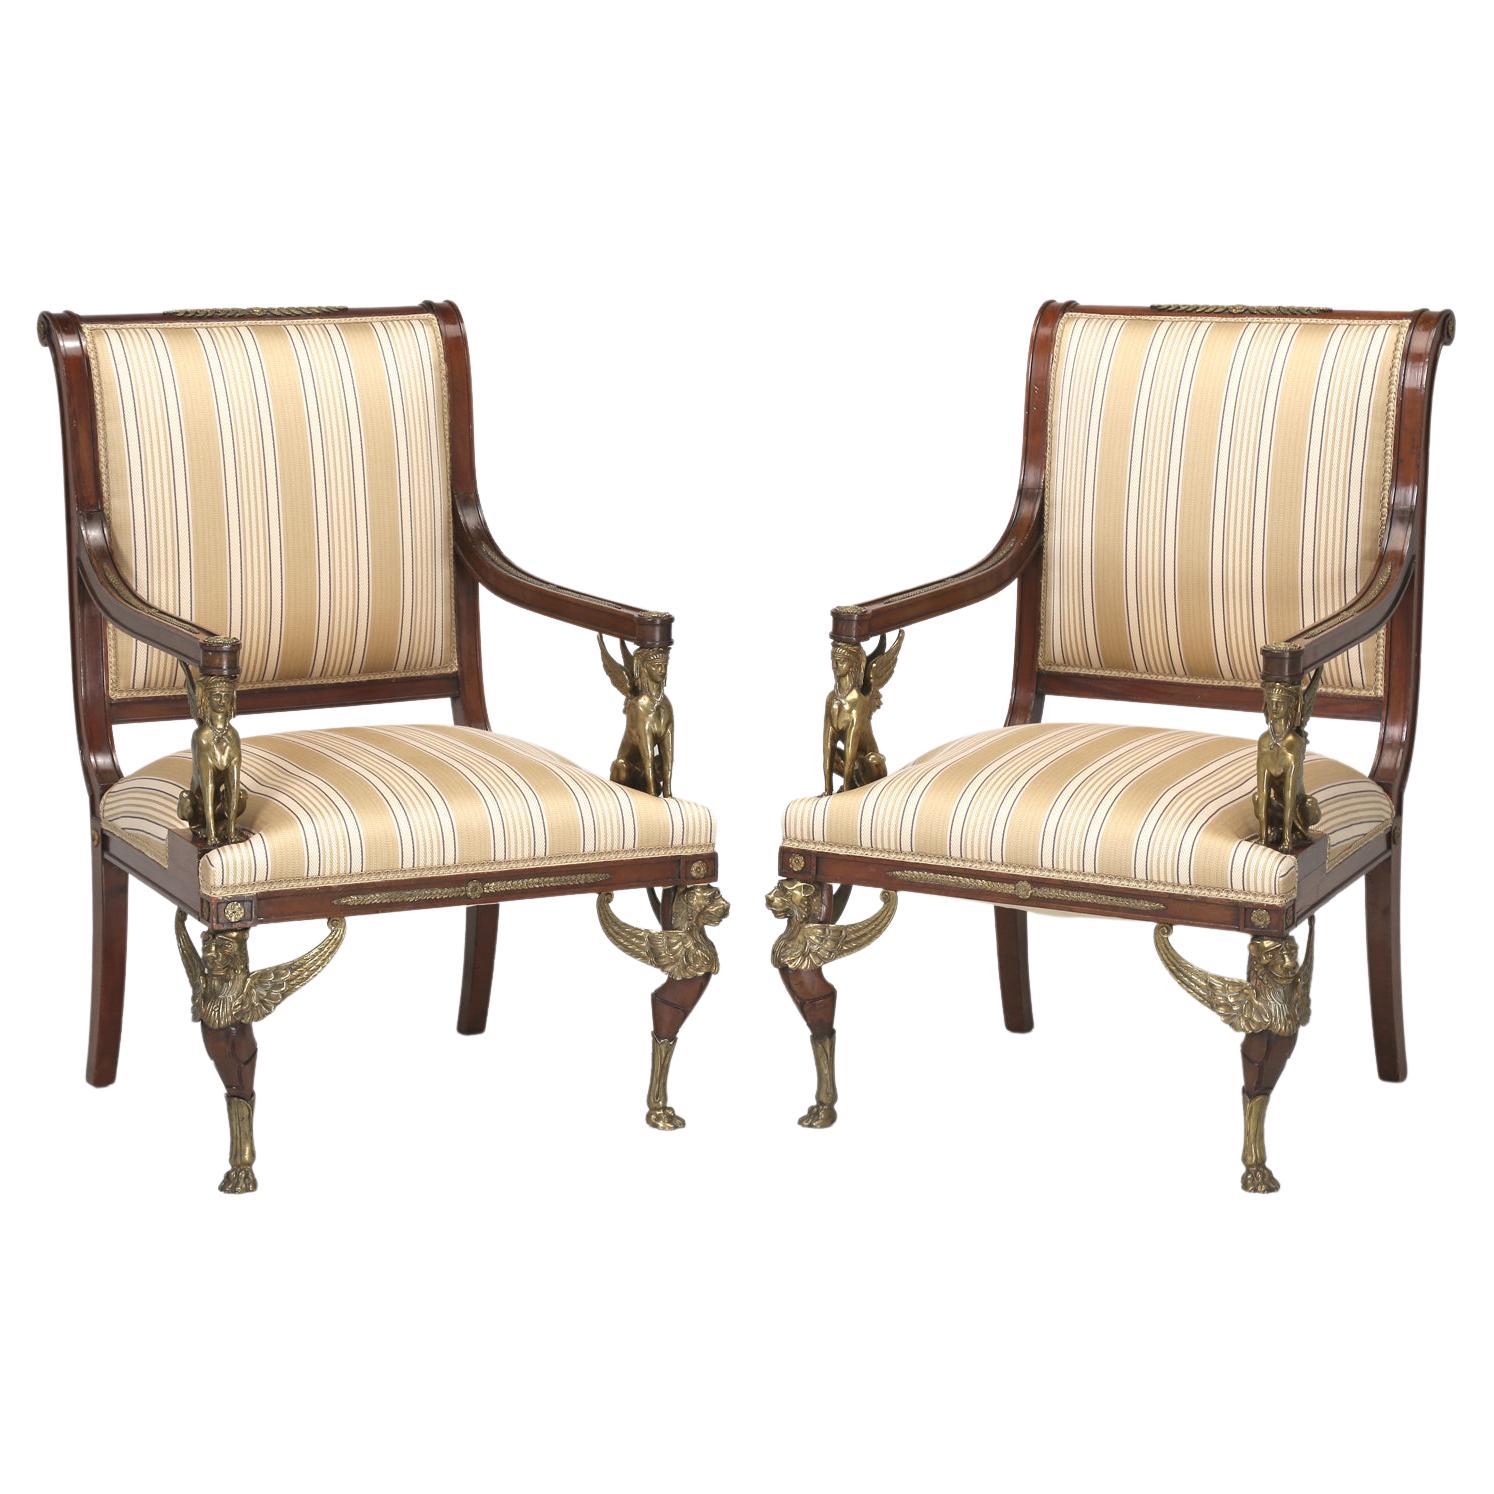 Antique French Empire Revival Arm Chairs Mahogany with Exceptional Quality c1840